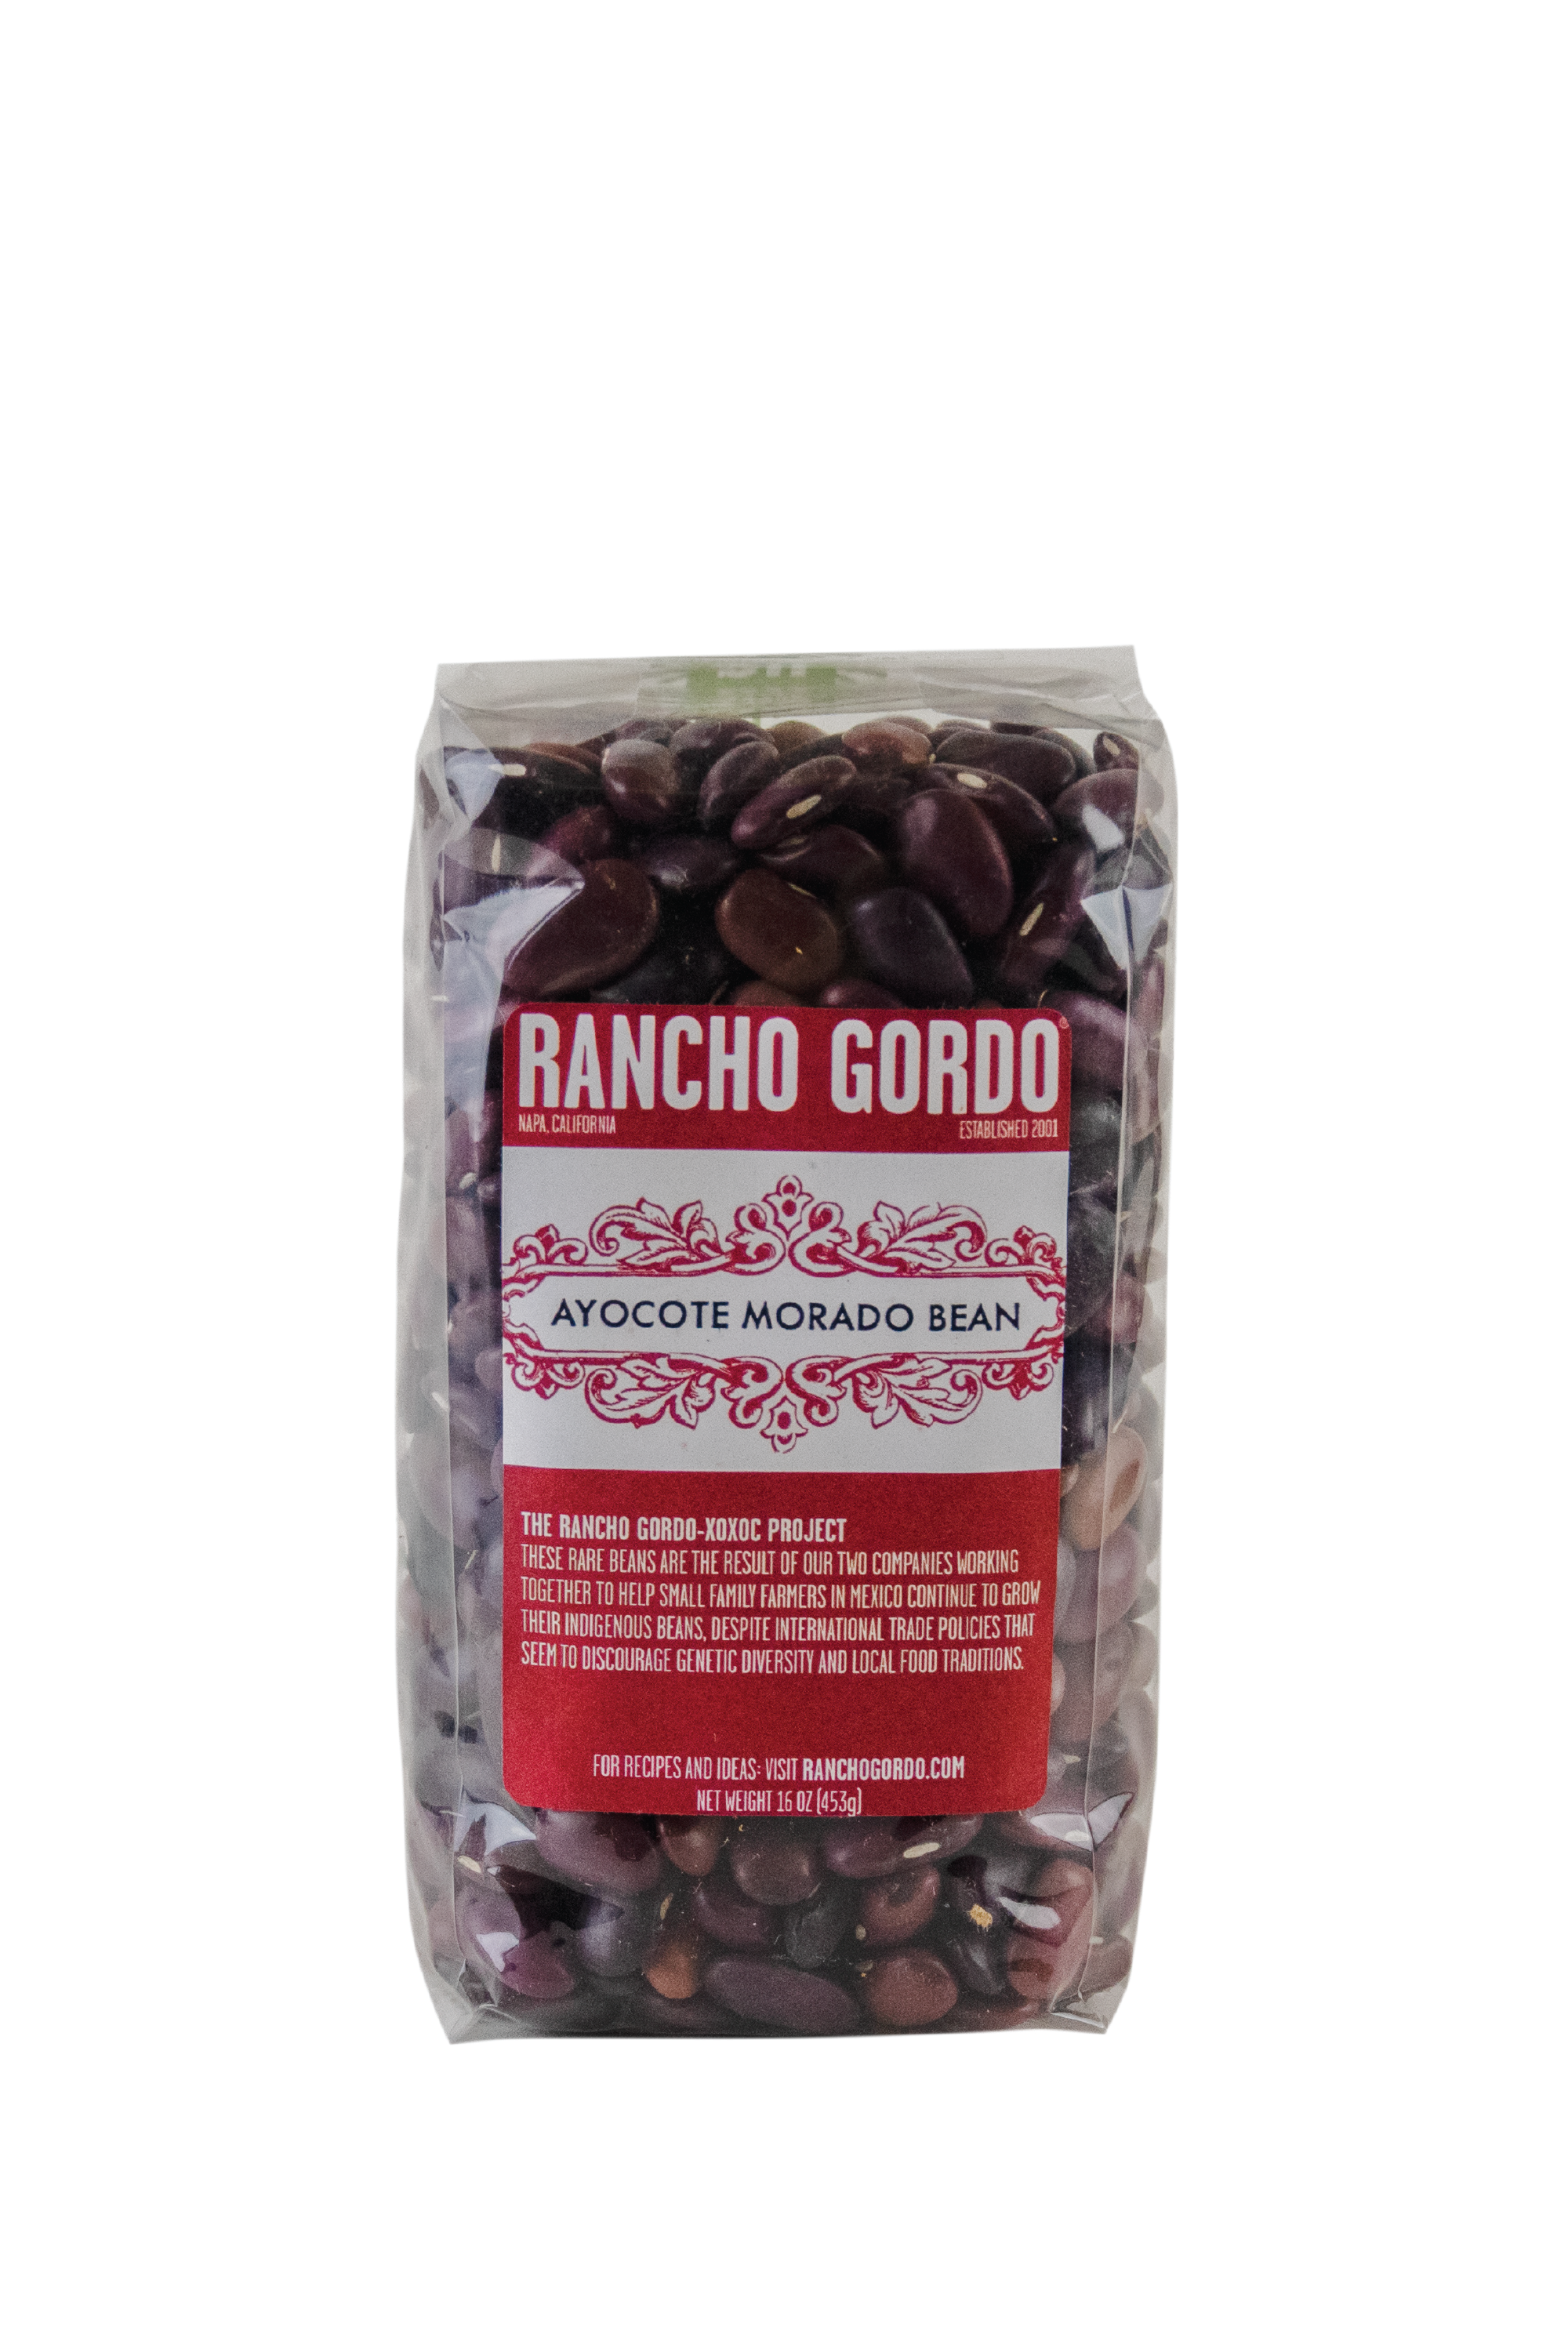 A One Pound Bag of Rancho Gordo Acoyote Morado Beans on a white background. Red and white label. Additional text on bag reads: The Rancho Gordo-Xoxoc Project. These rare beans are the result of our two companies working together to help small family farmers in Mexico continue to grow their indigenous beans, despite international trade policies that seem to discourage genetic diversity & local food traditions.